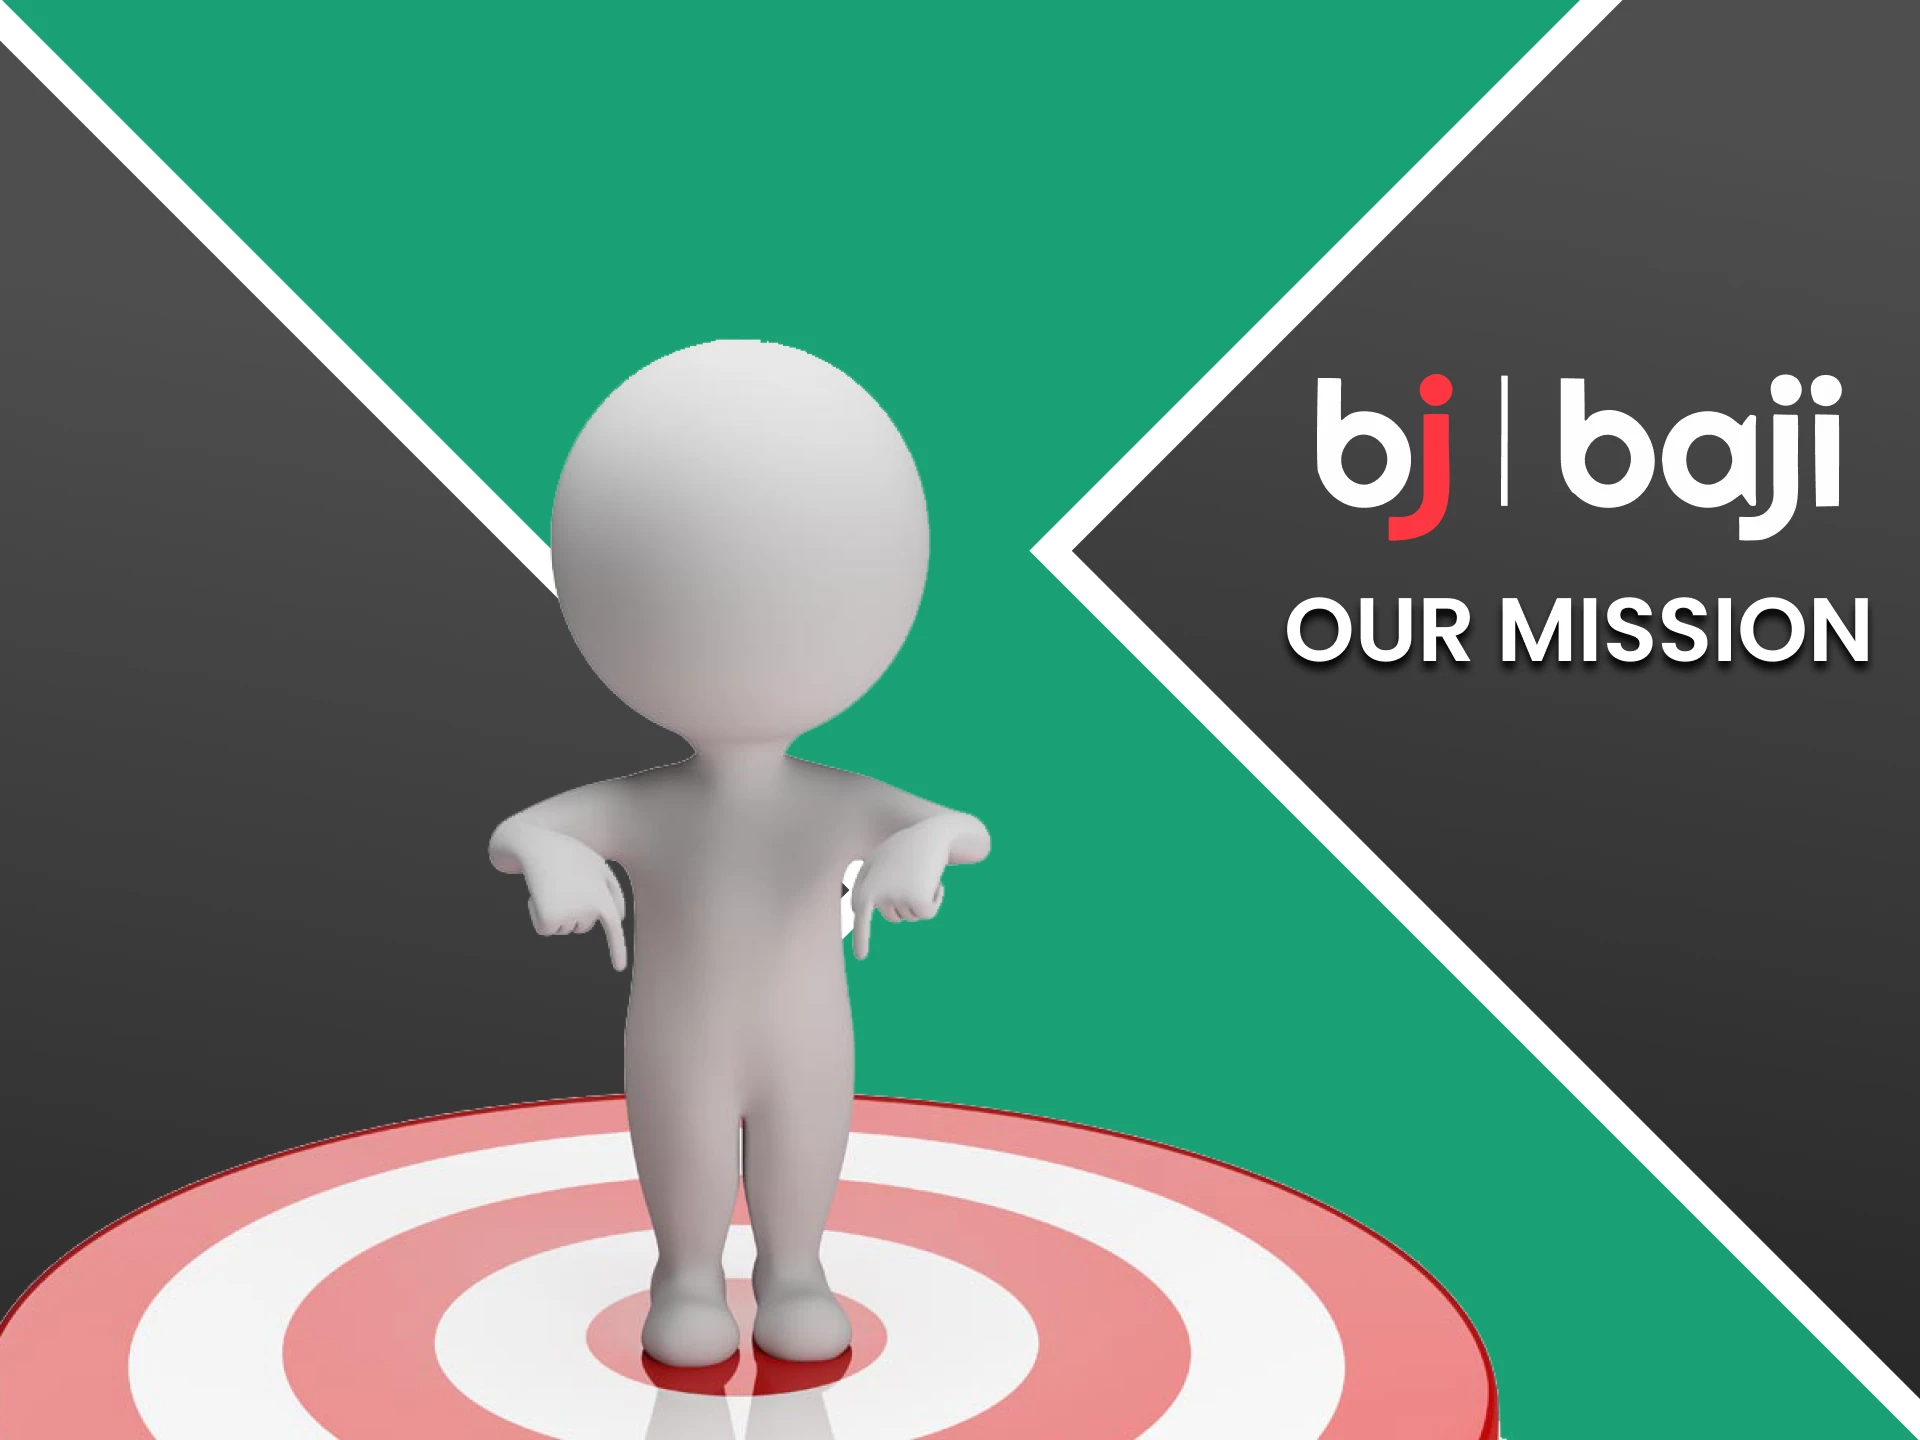 We will tell you about the mission of the Baji team.